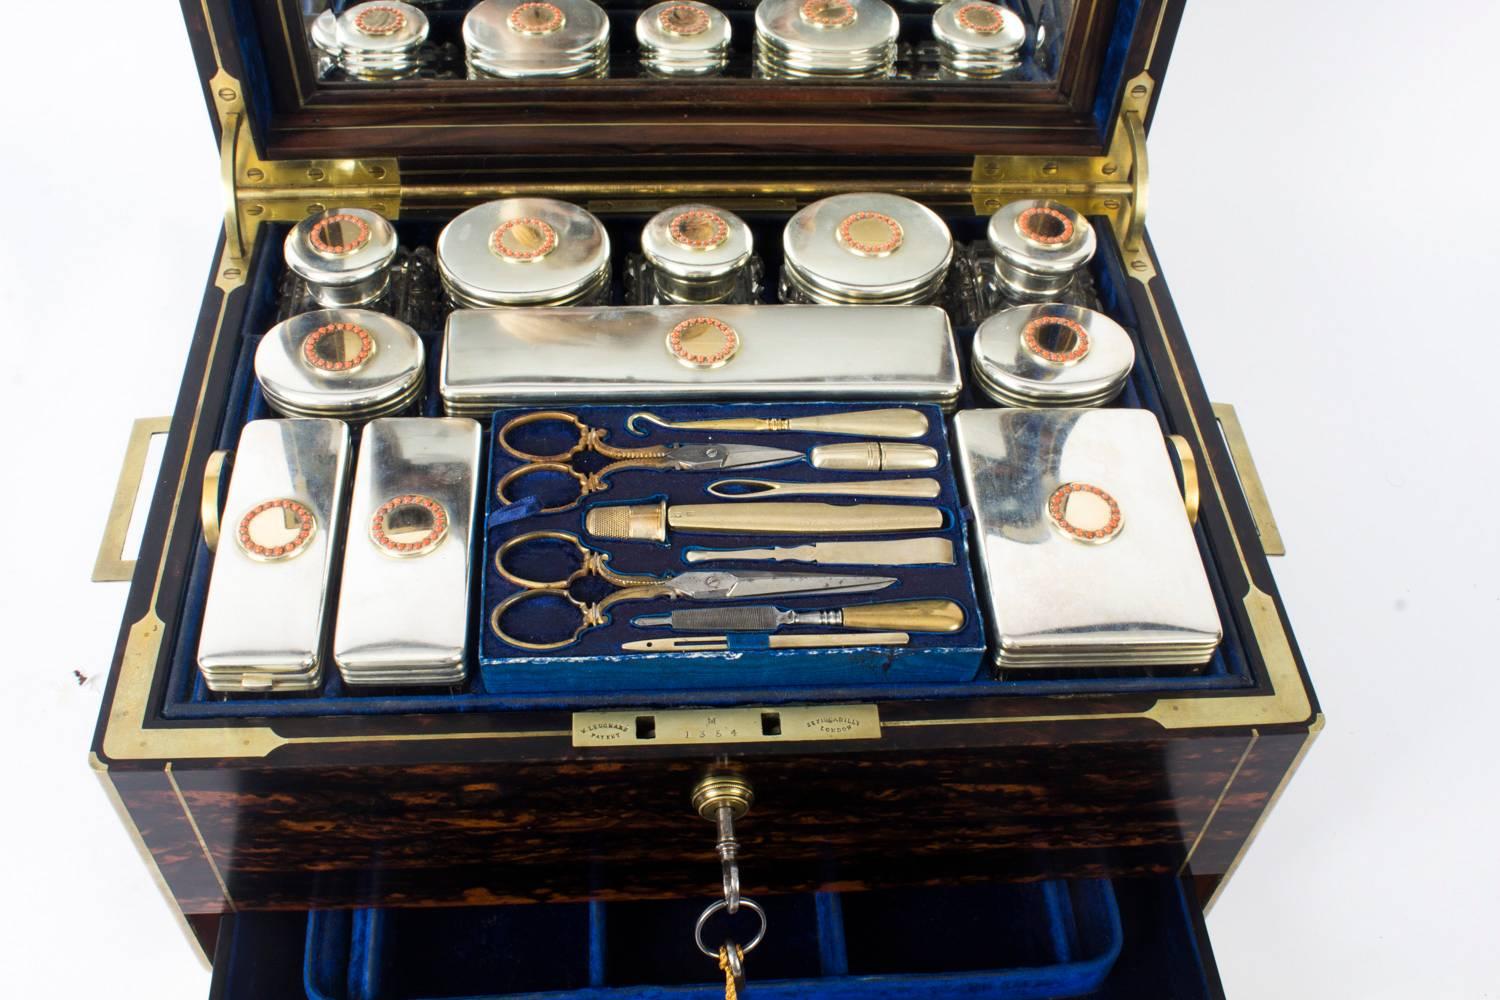 This is a superb antique Victorian lady's Coromandel brass banded and brass inlaid travelling dressing case, by Leuchars, 38 Piccadilly, London and circa 1870 in date.

The beautiful interior is fitted with silver mounted cut glass bottles and jars